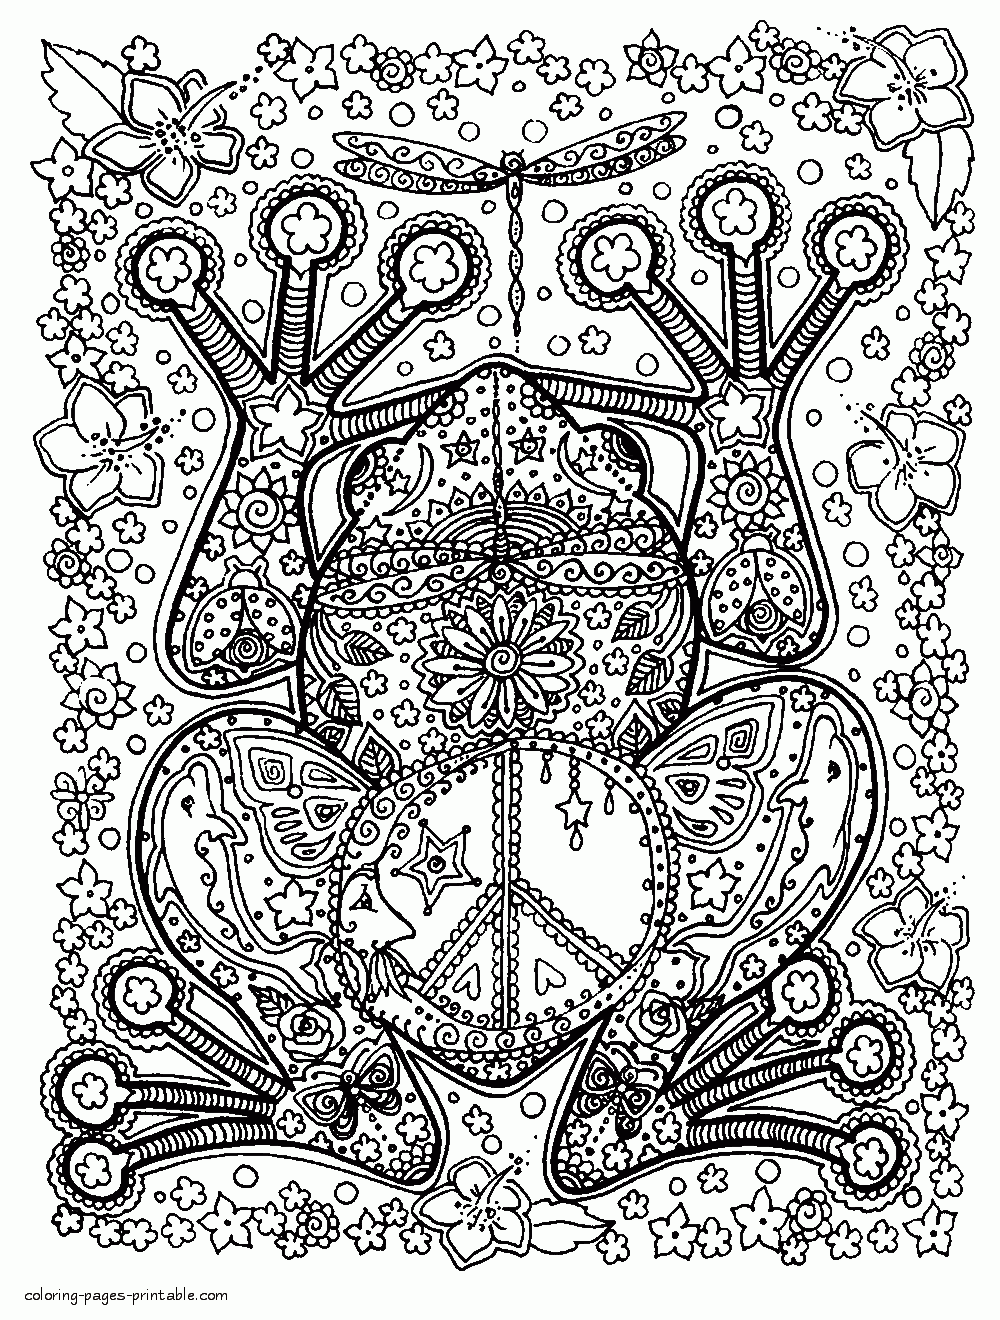 Adult Coloring Pages With Animals. A Frog To Print